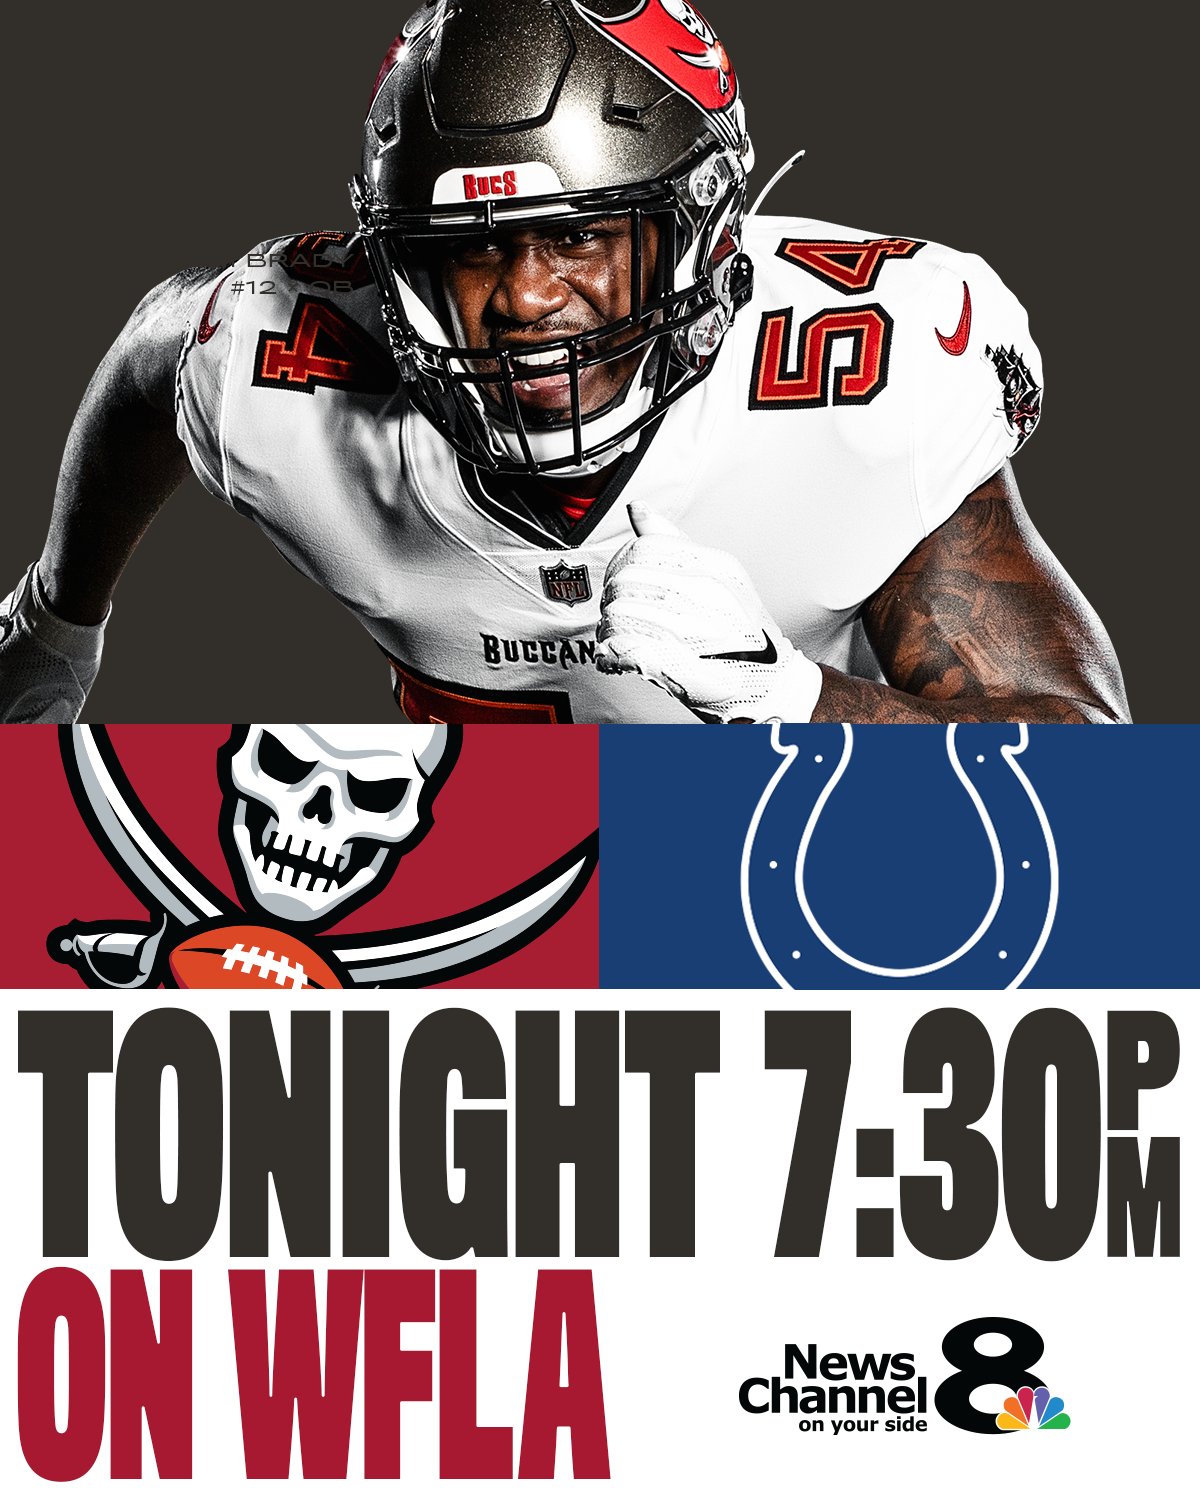 what channel are the tampa bay buccaneers on tonight